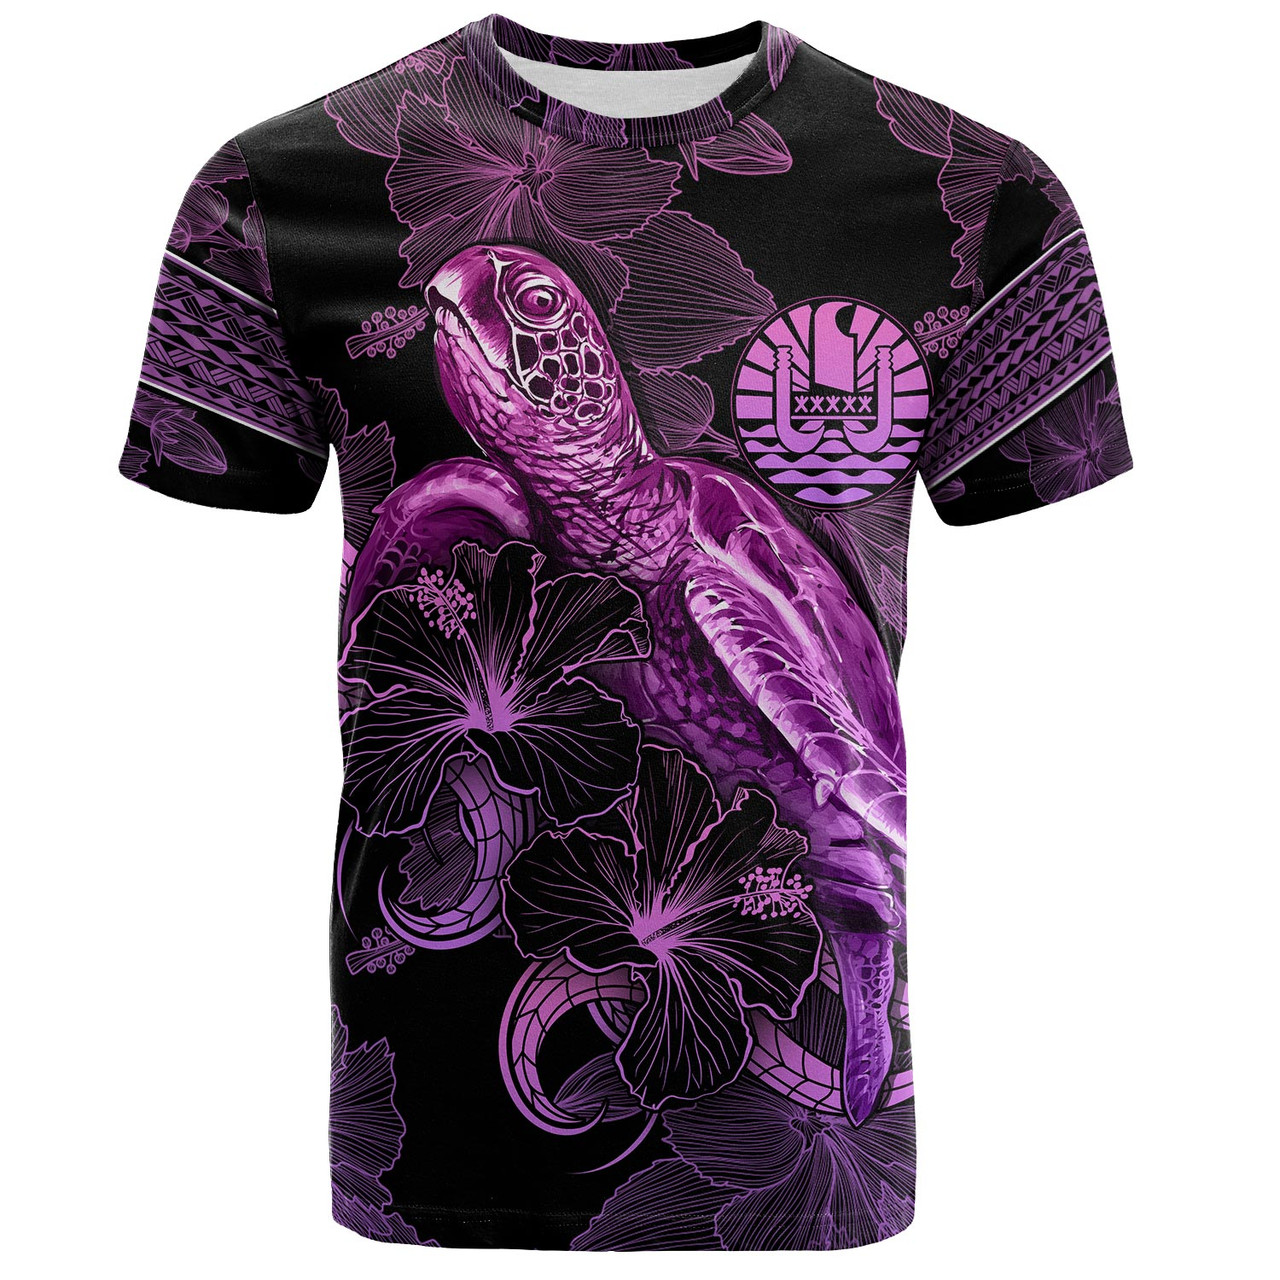 French Polynesia T-Shirt Sea Turtle With Blooming Hibiscus Flowers Tribal Purple